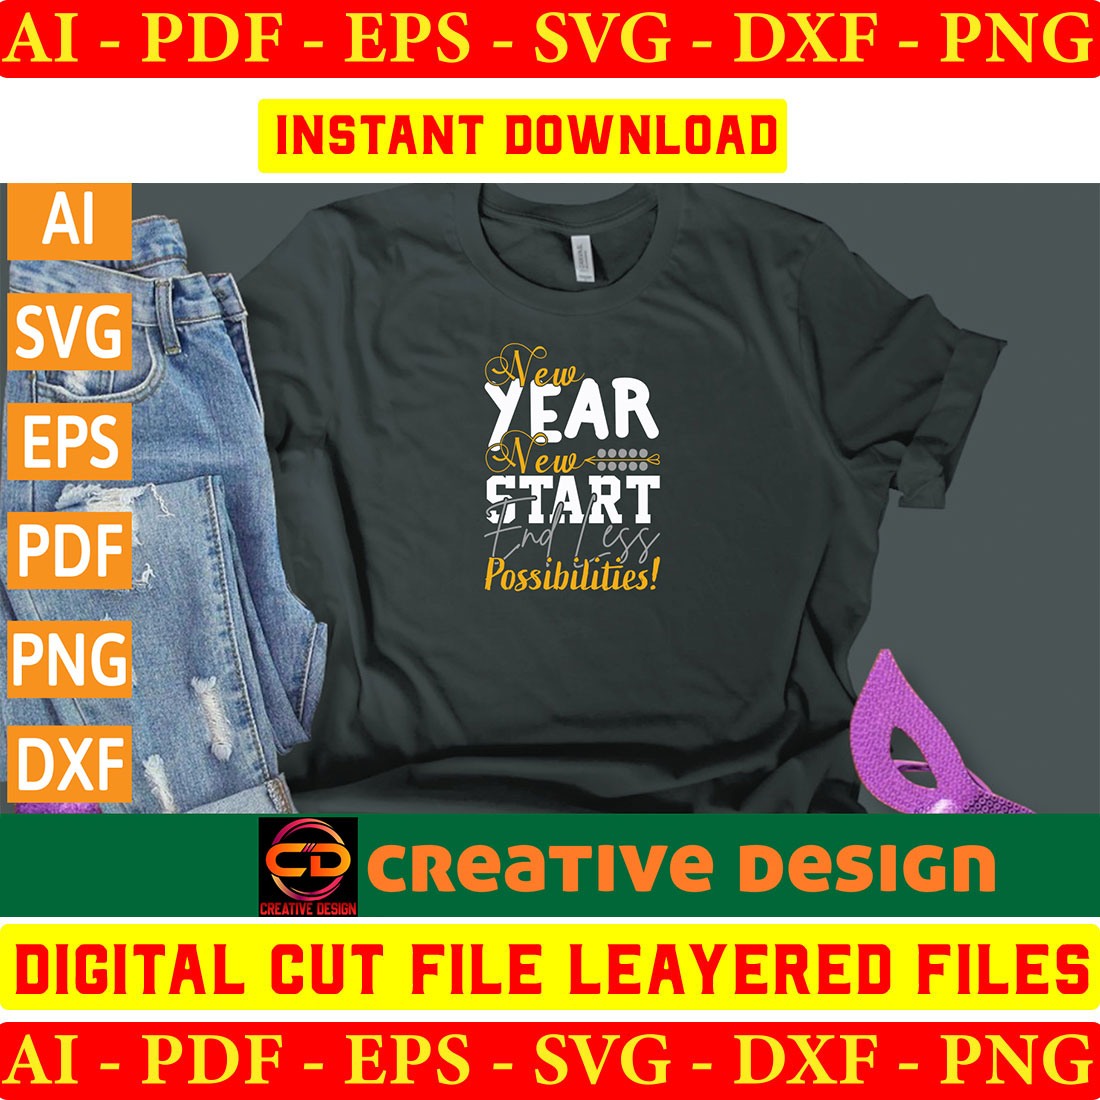 T - shirt with the words year start and a pair of jeans.